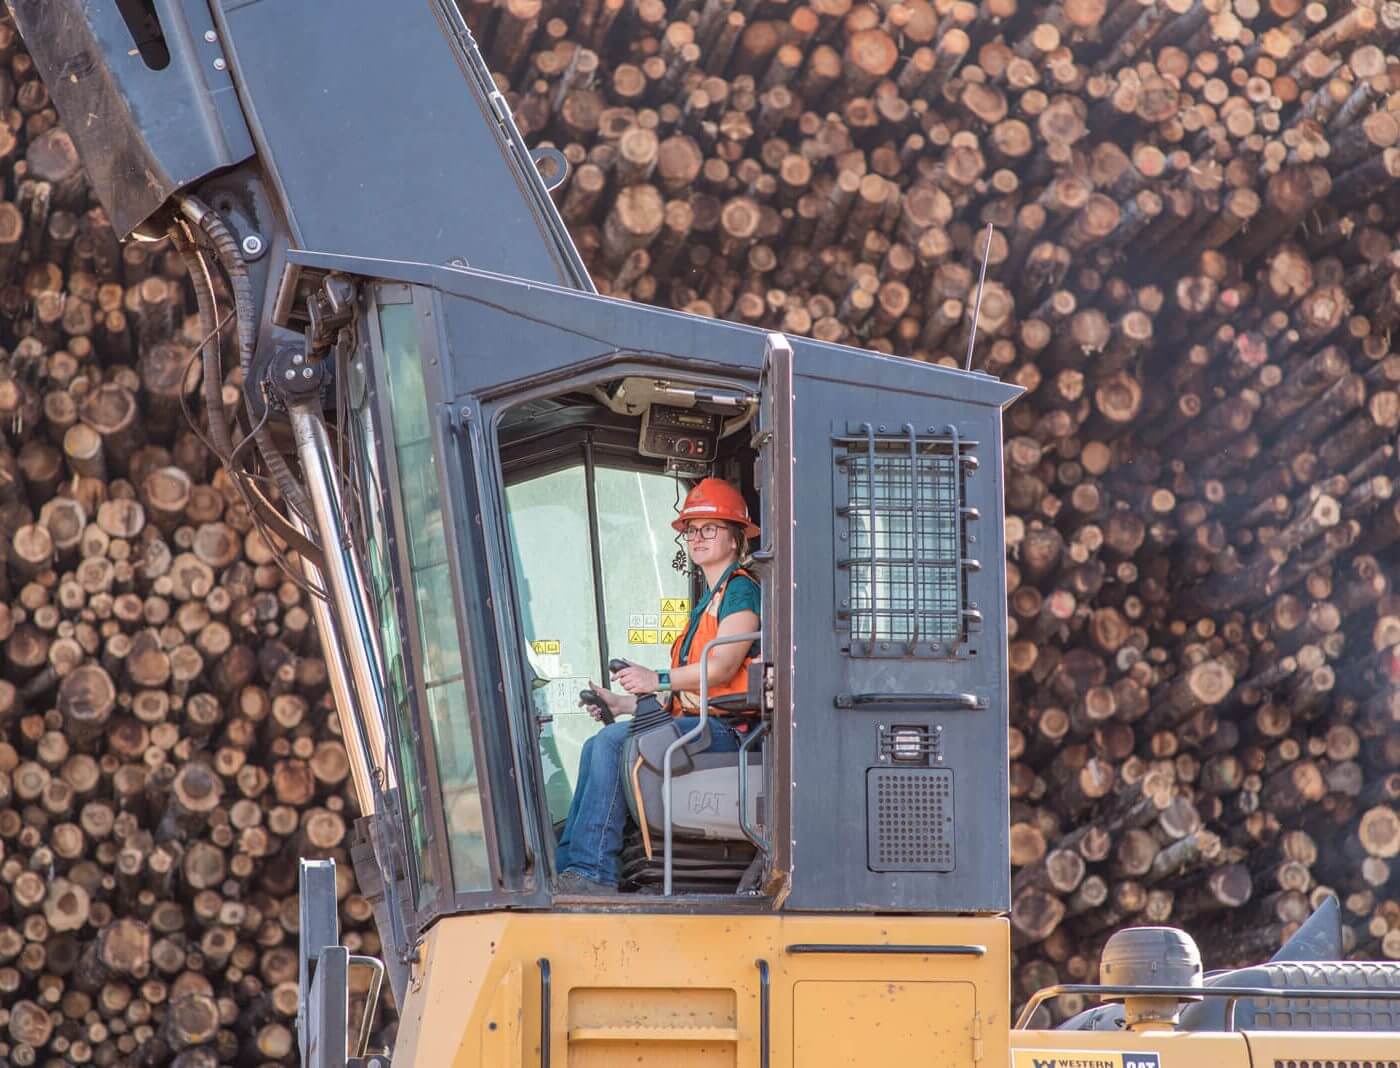 A woman operating large machinery in front of a large pile of logs.